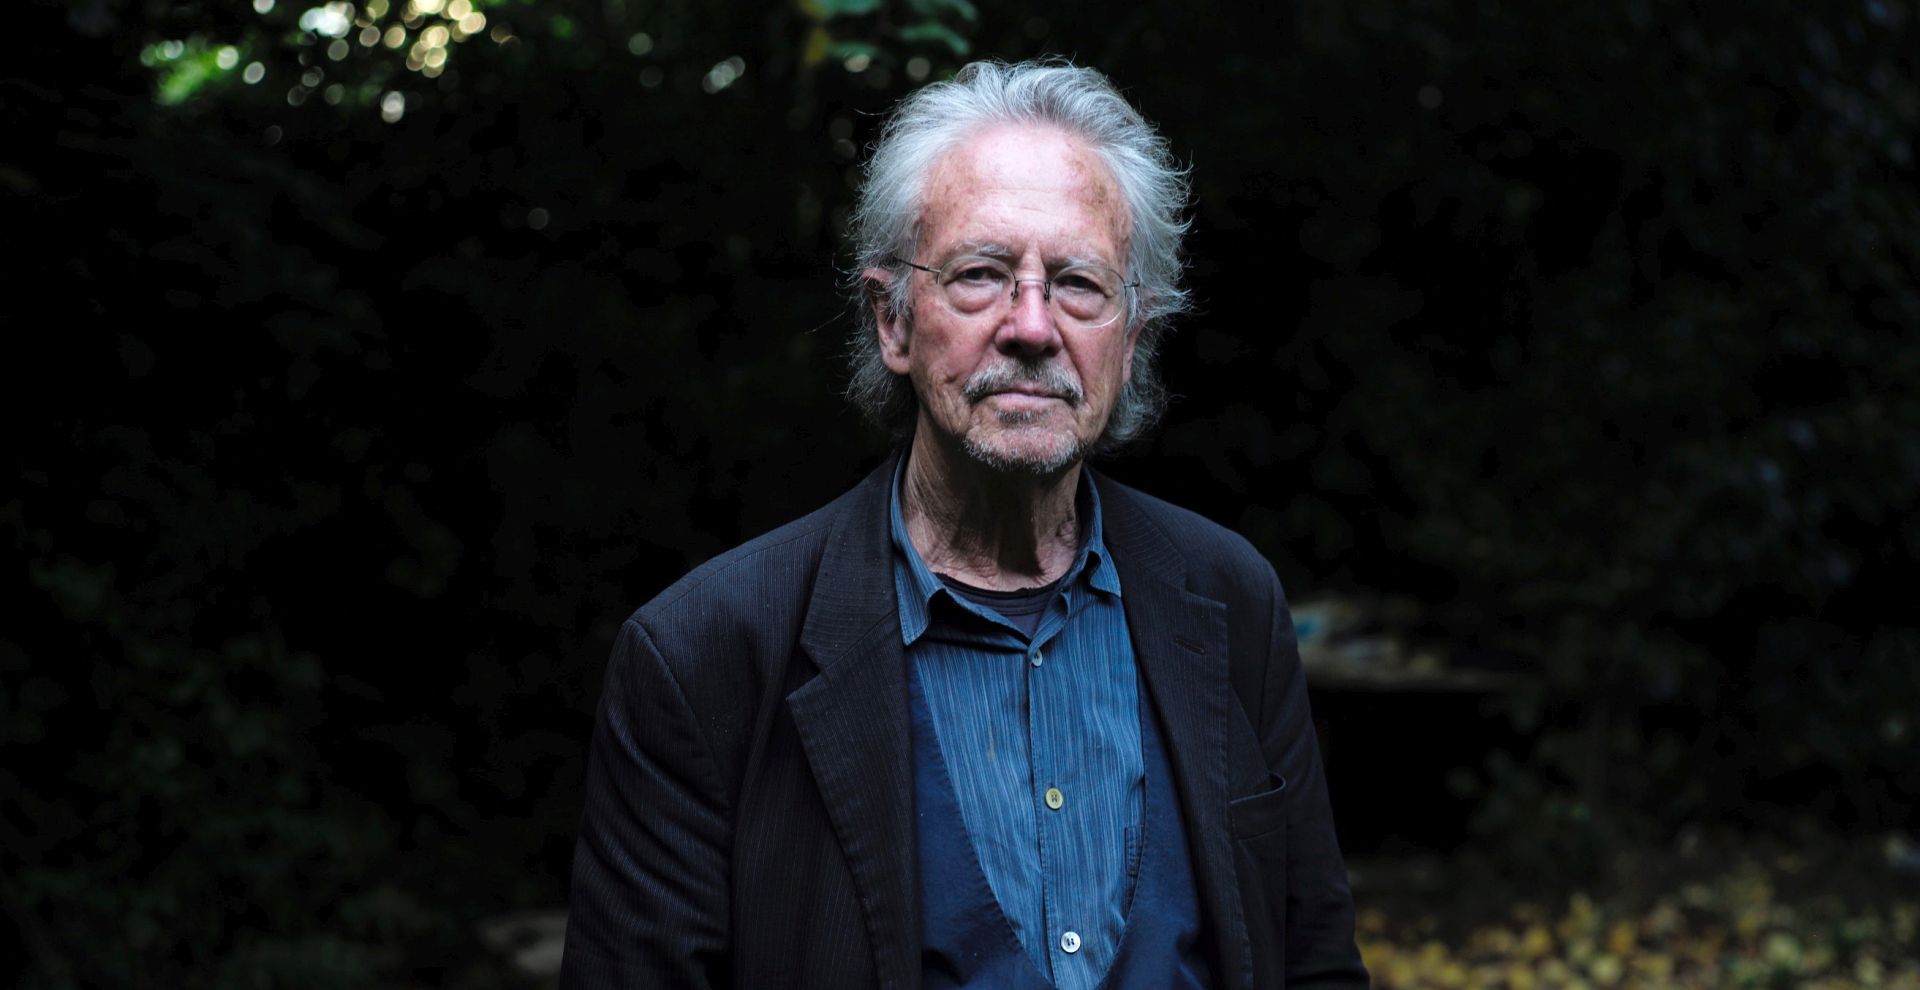 epa07910653 Austrian writer Peter Handke poses for photographs at his home in Chaville, near Paris, France, 10 October 2019. The Nobel Prize in Literature for 2019 is awarded to Peter Handke, the Swedish Academy announced on 10 October 2019.  EPA/JULIEN DE ROSA